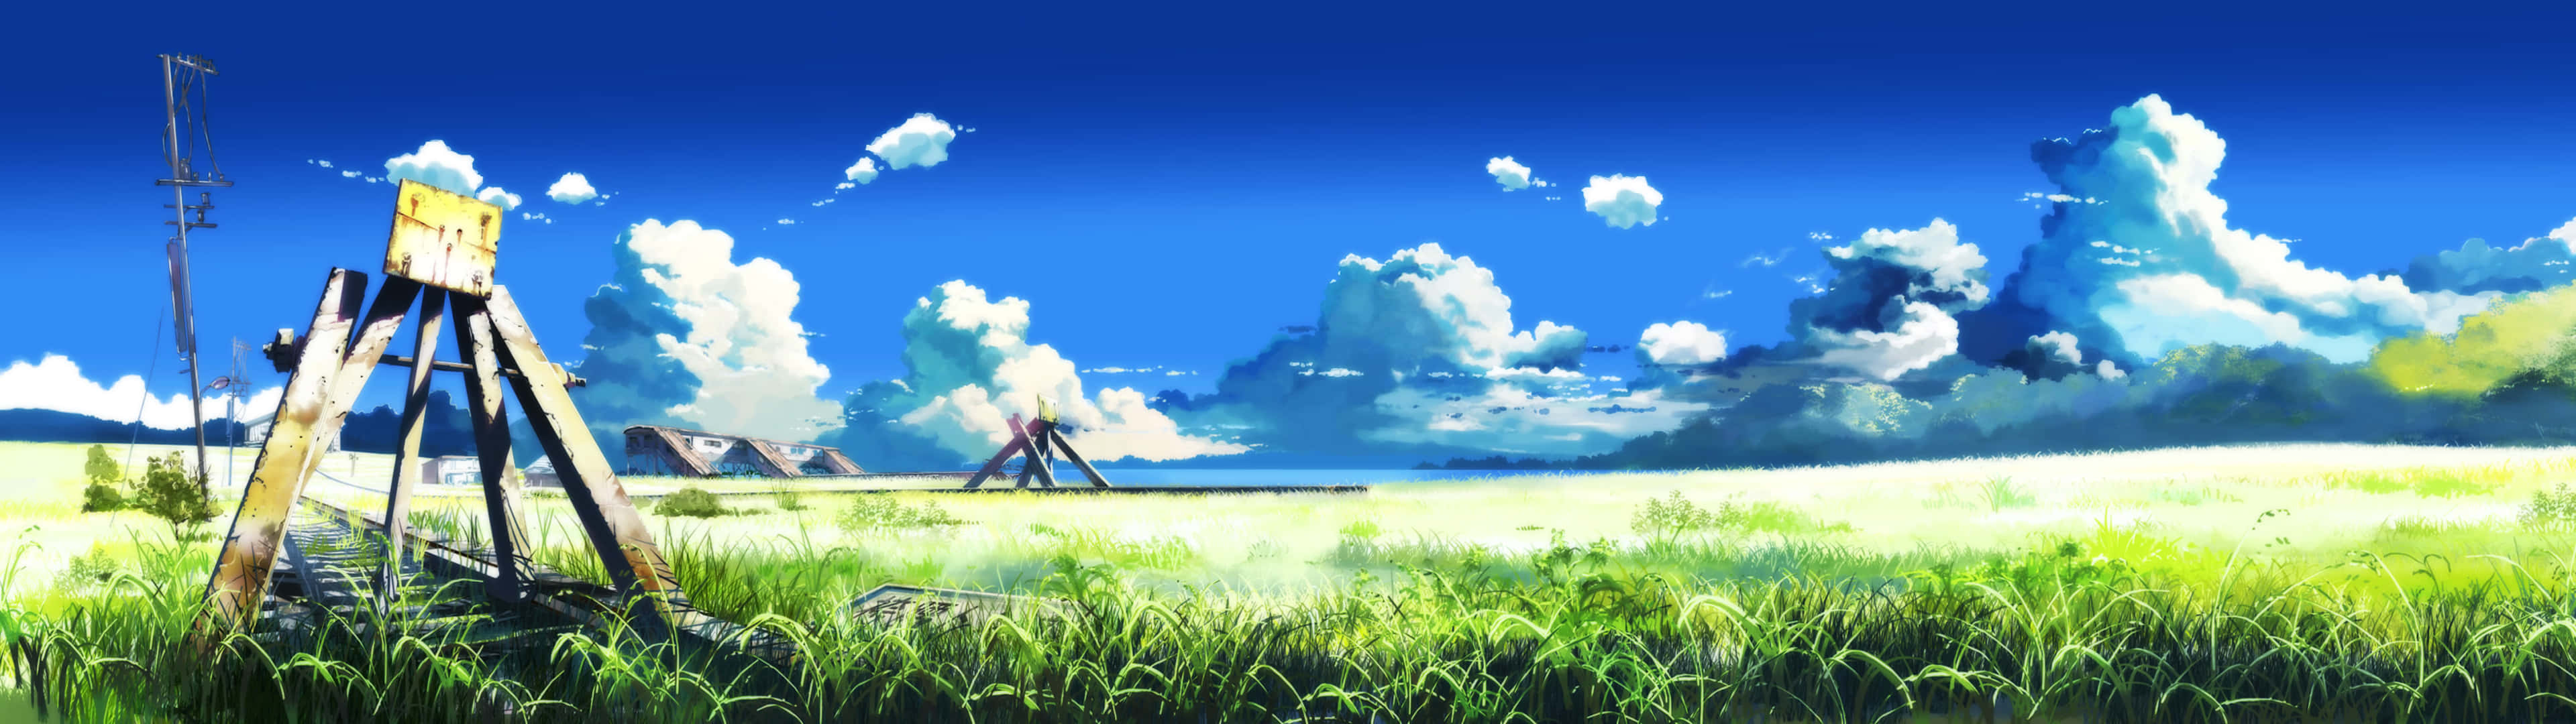 A Field With A Boat In The Middle Of It Wallpaper